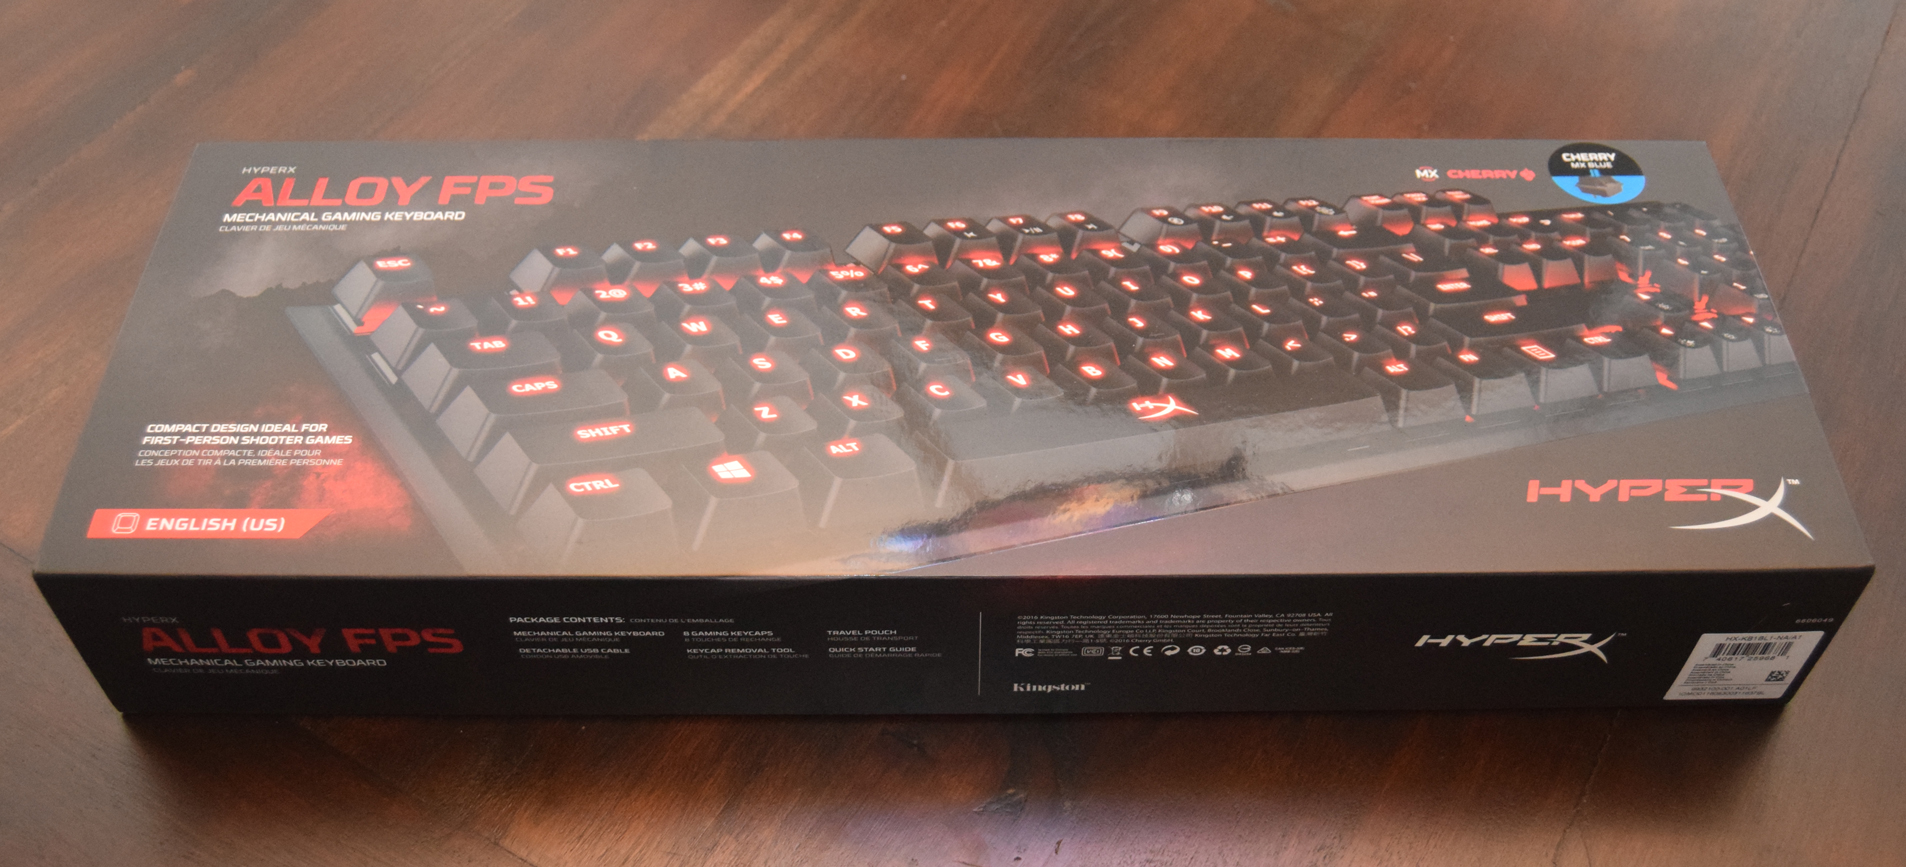 HyperX Alloy FPS Mechanical Gaming Keyboard review box front